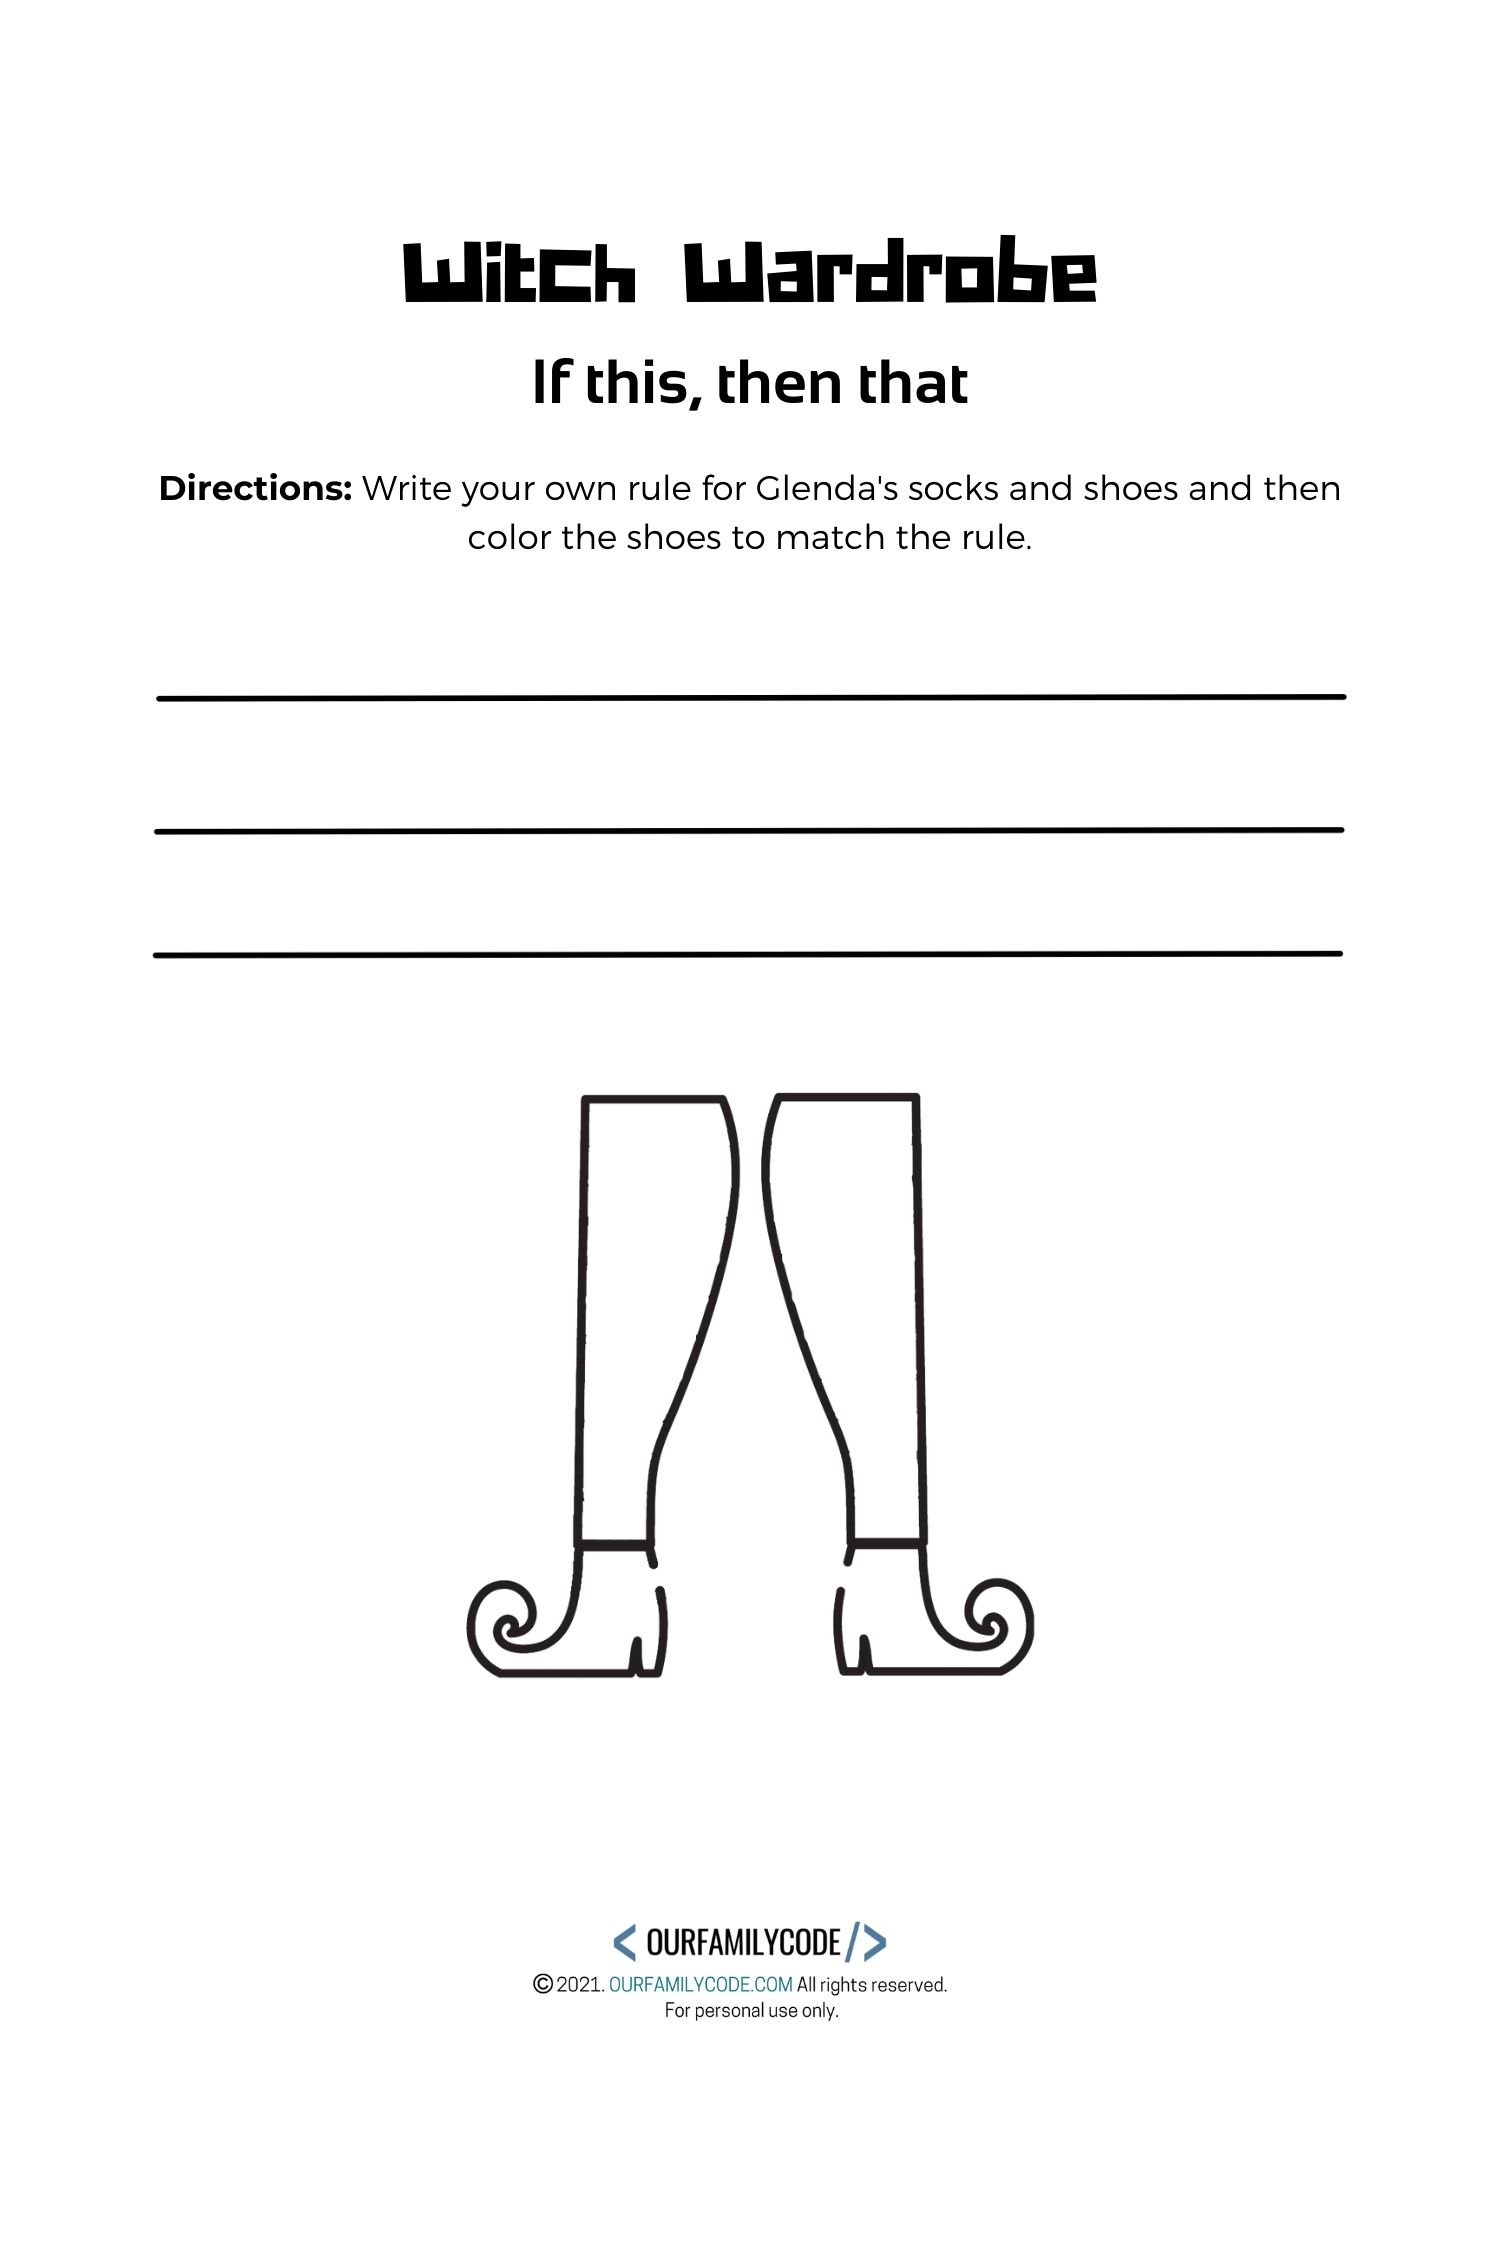 A picture of an unplugged coding worksheet for kids to write their own conditional statement rule and draw an image to represent the statement.